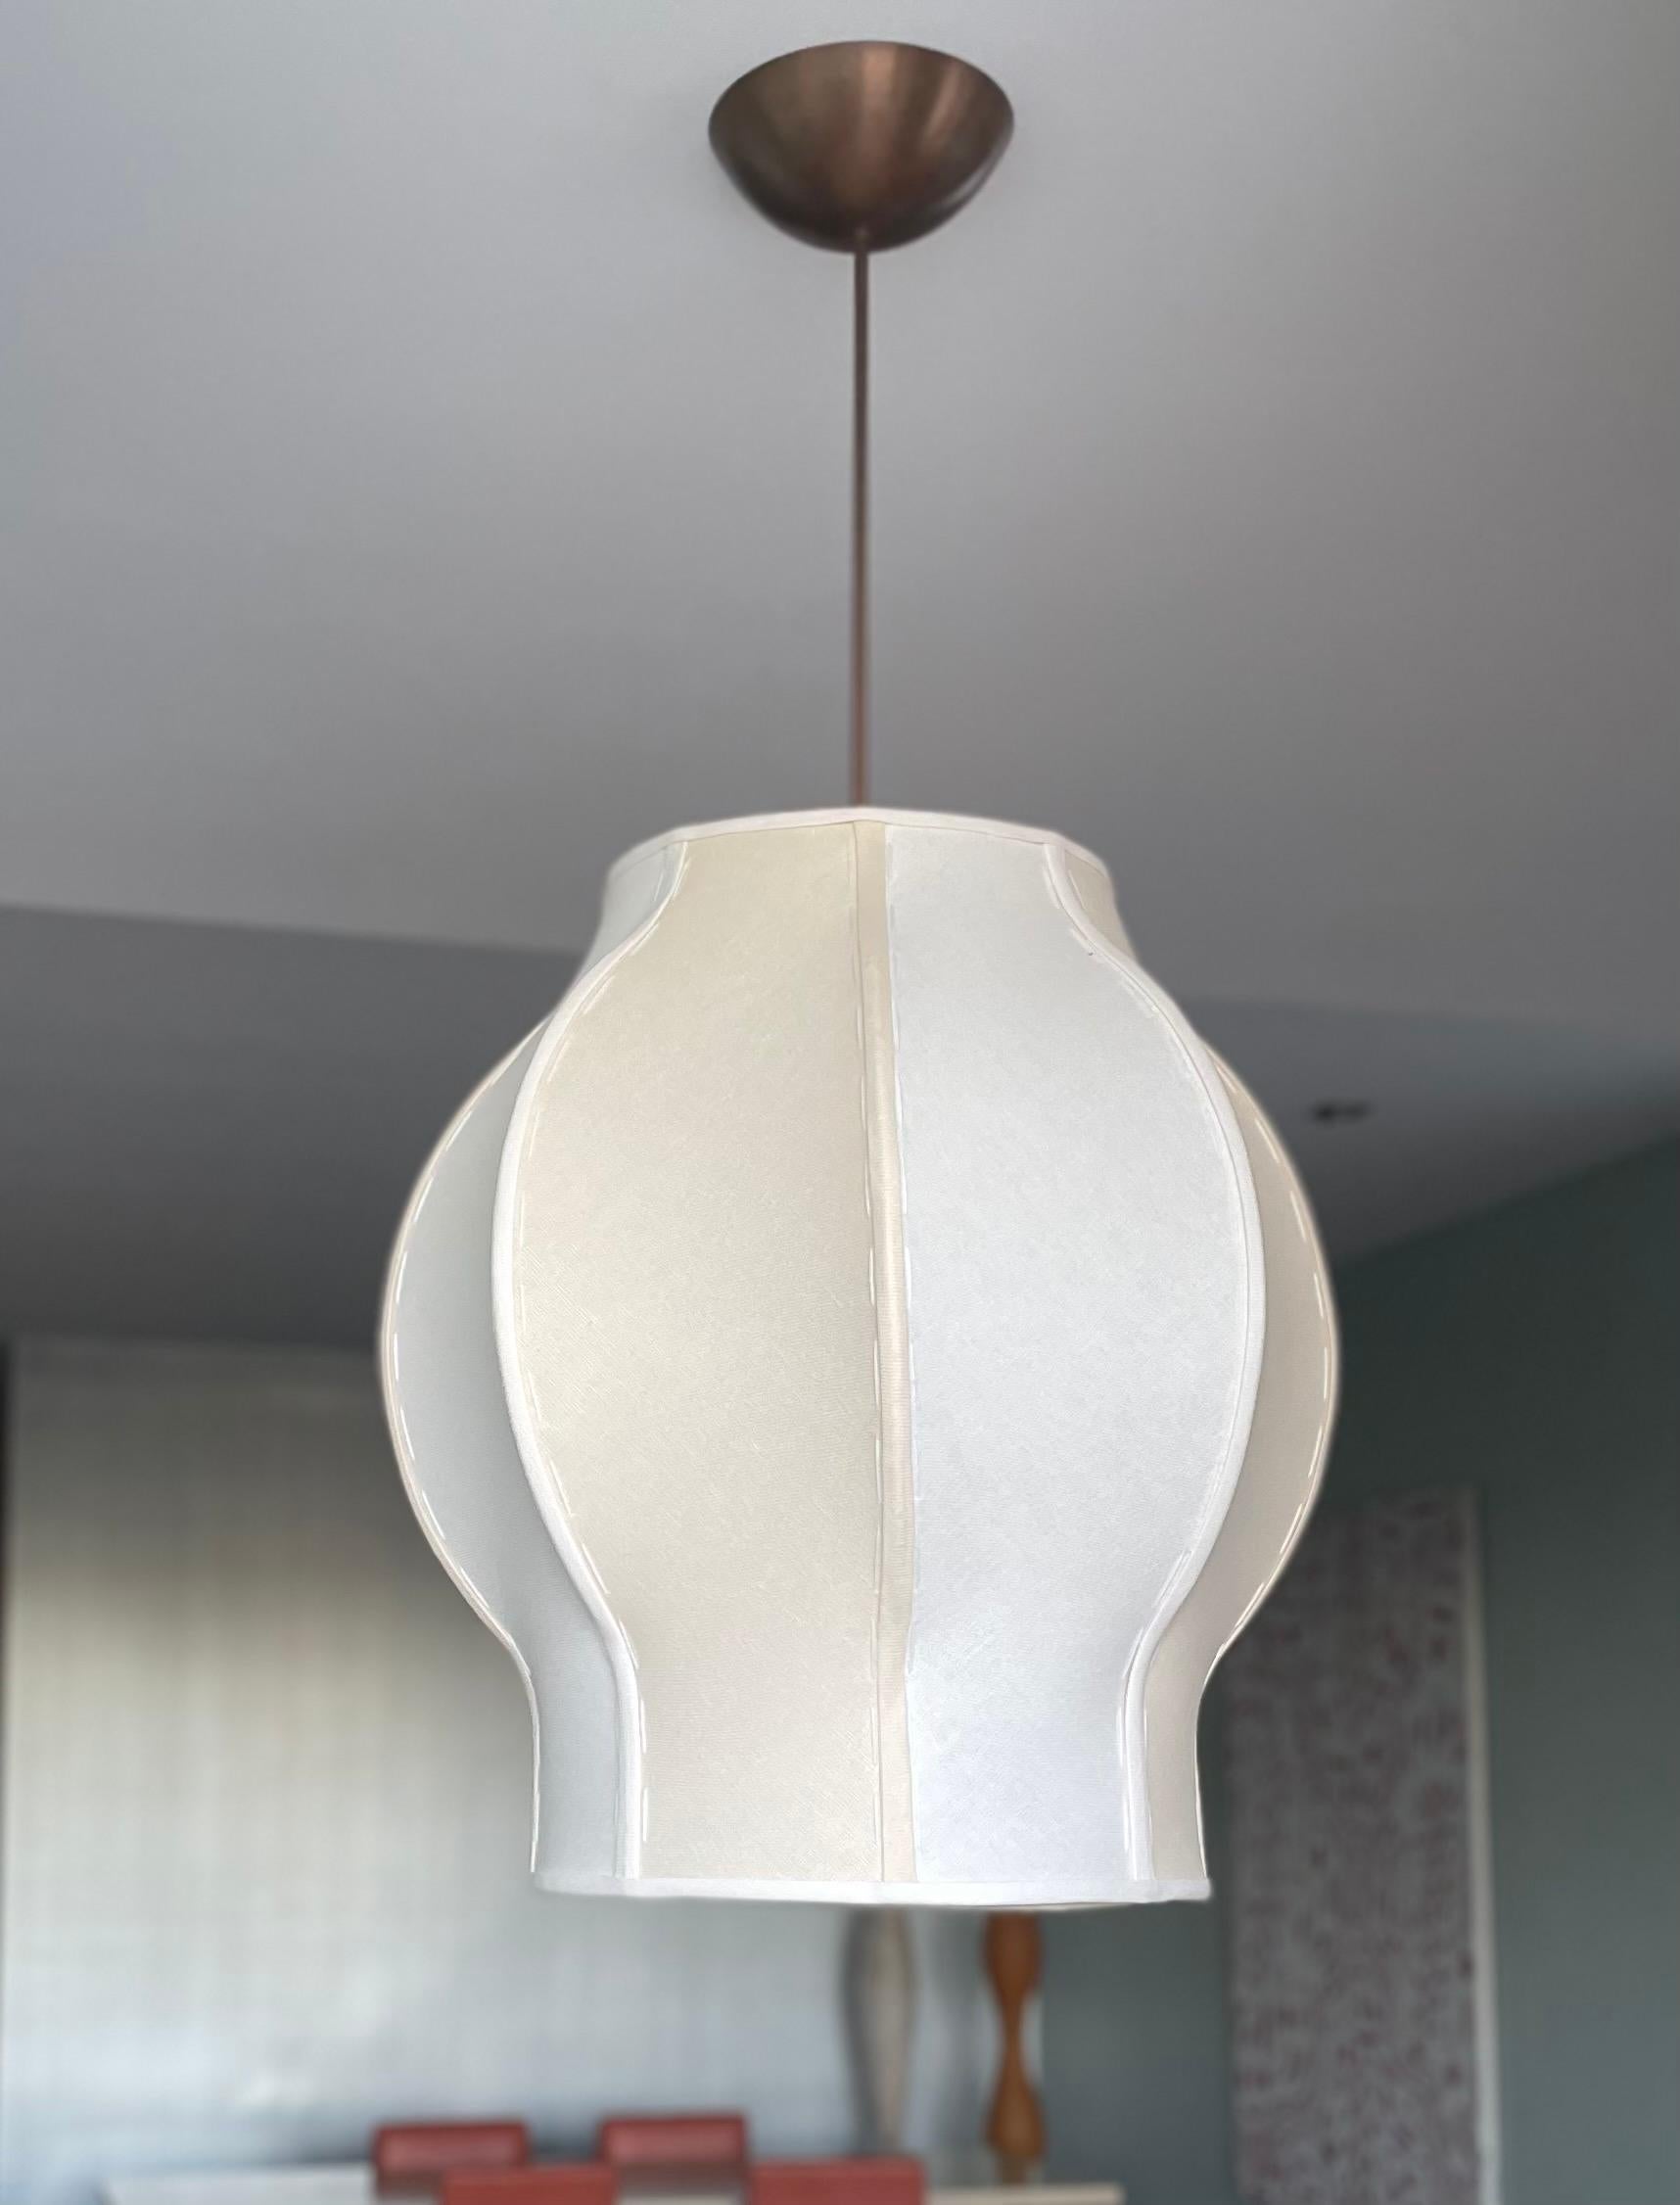 Jules is a graceful handmade 2-tone pendant light with a soft organic shape reminiscent of a translucent jelly fish. It can also be used as a modern take on Chinoiserie or Hollywood Recency depending on the choice of fabrics and metal finishes you